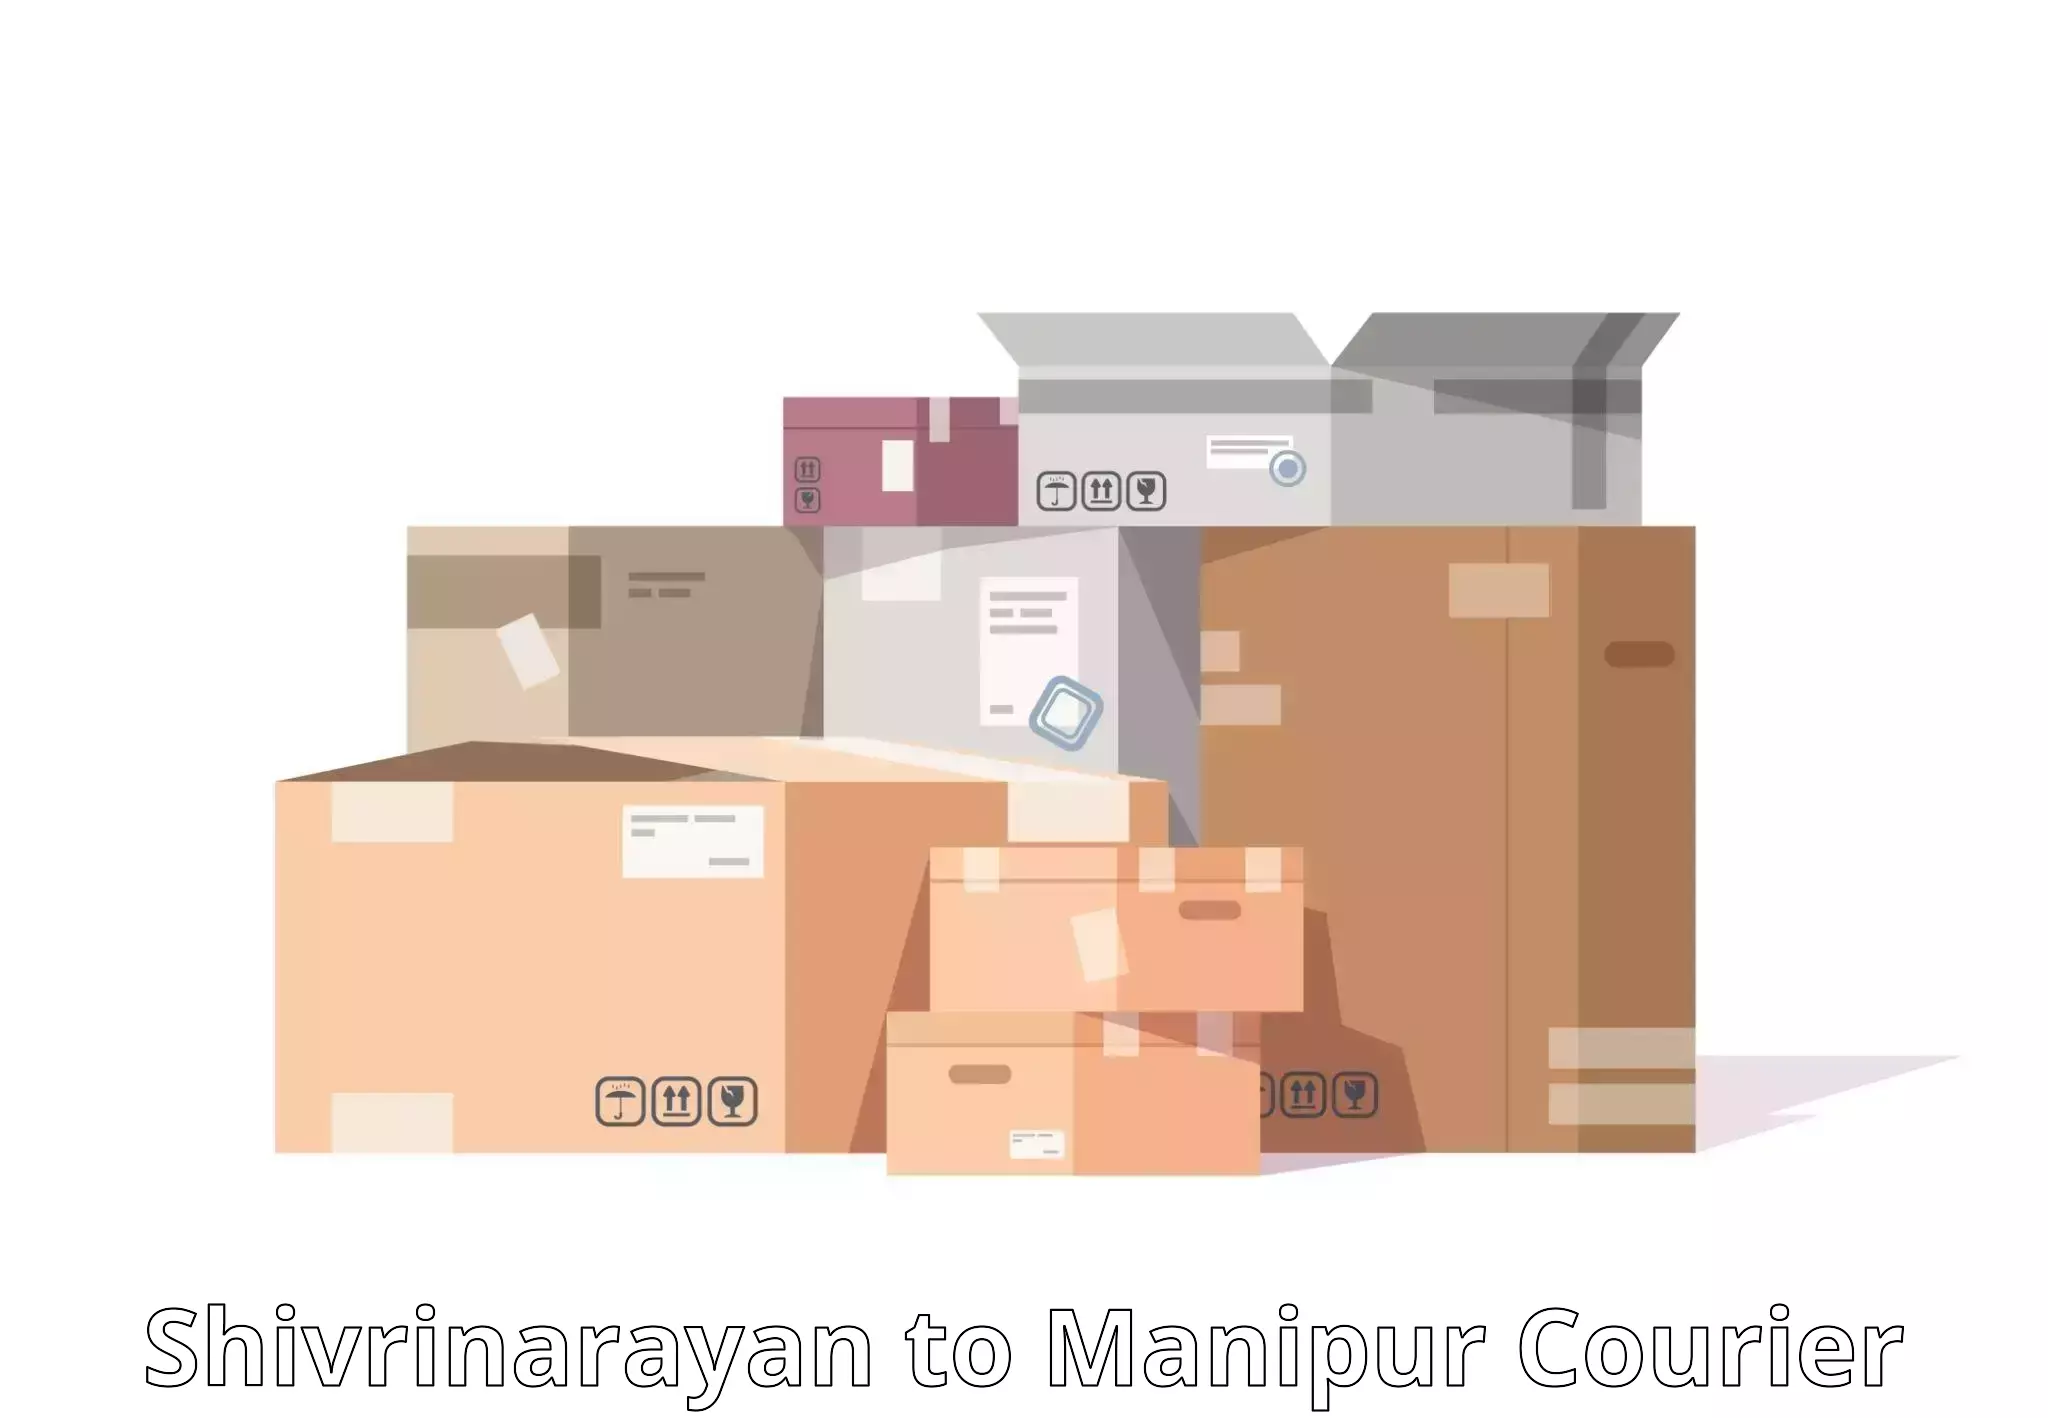 Reliable courier service Shivrinarayan to Manipur